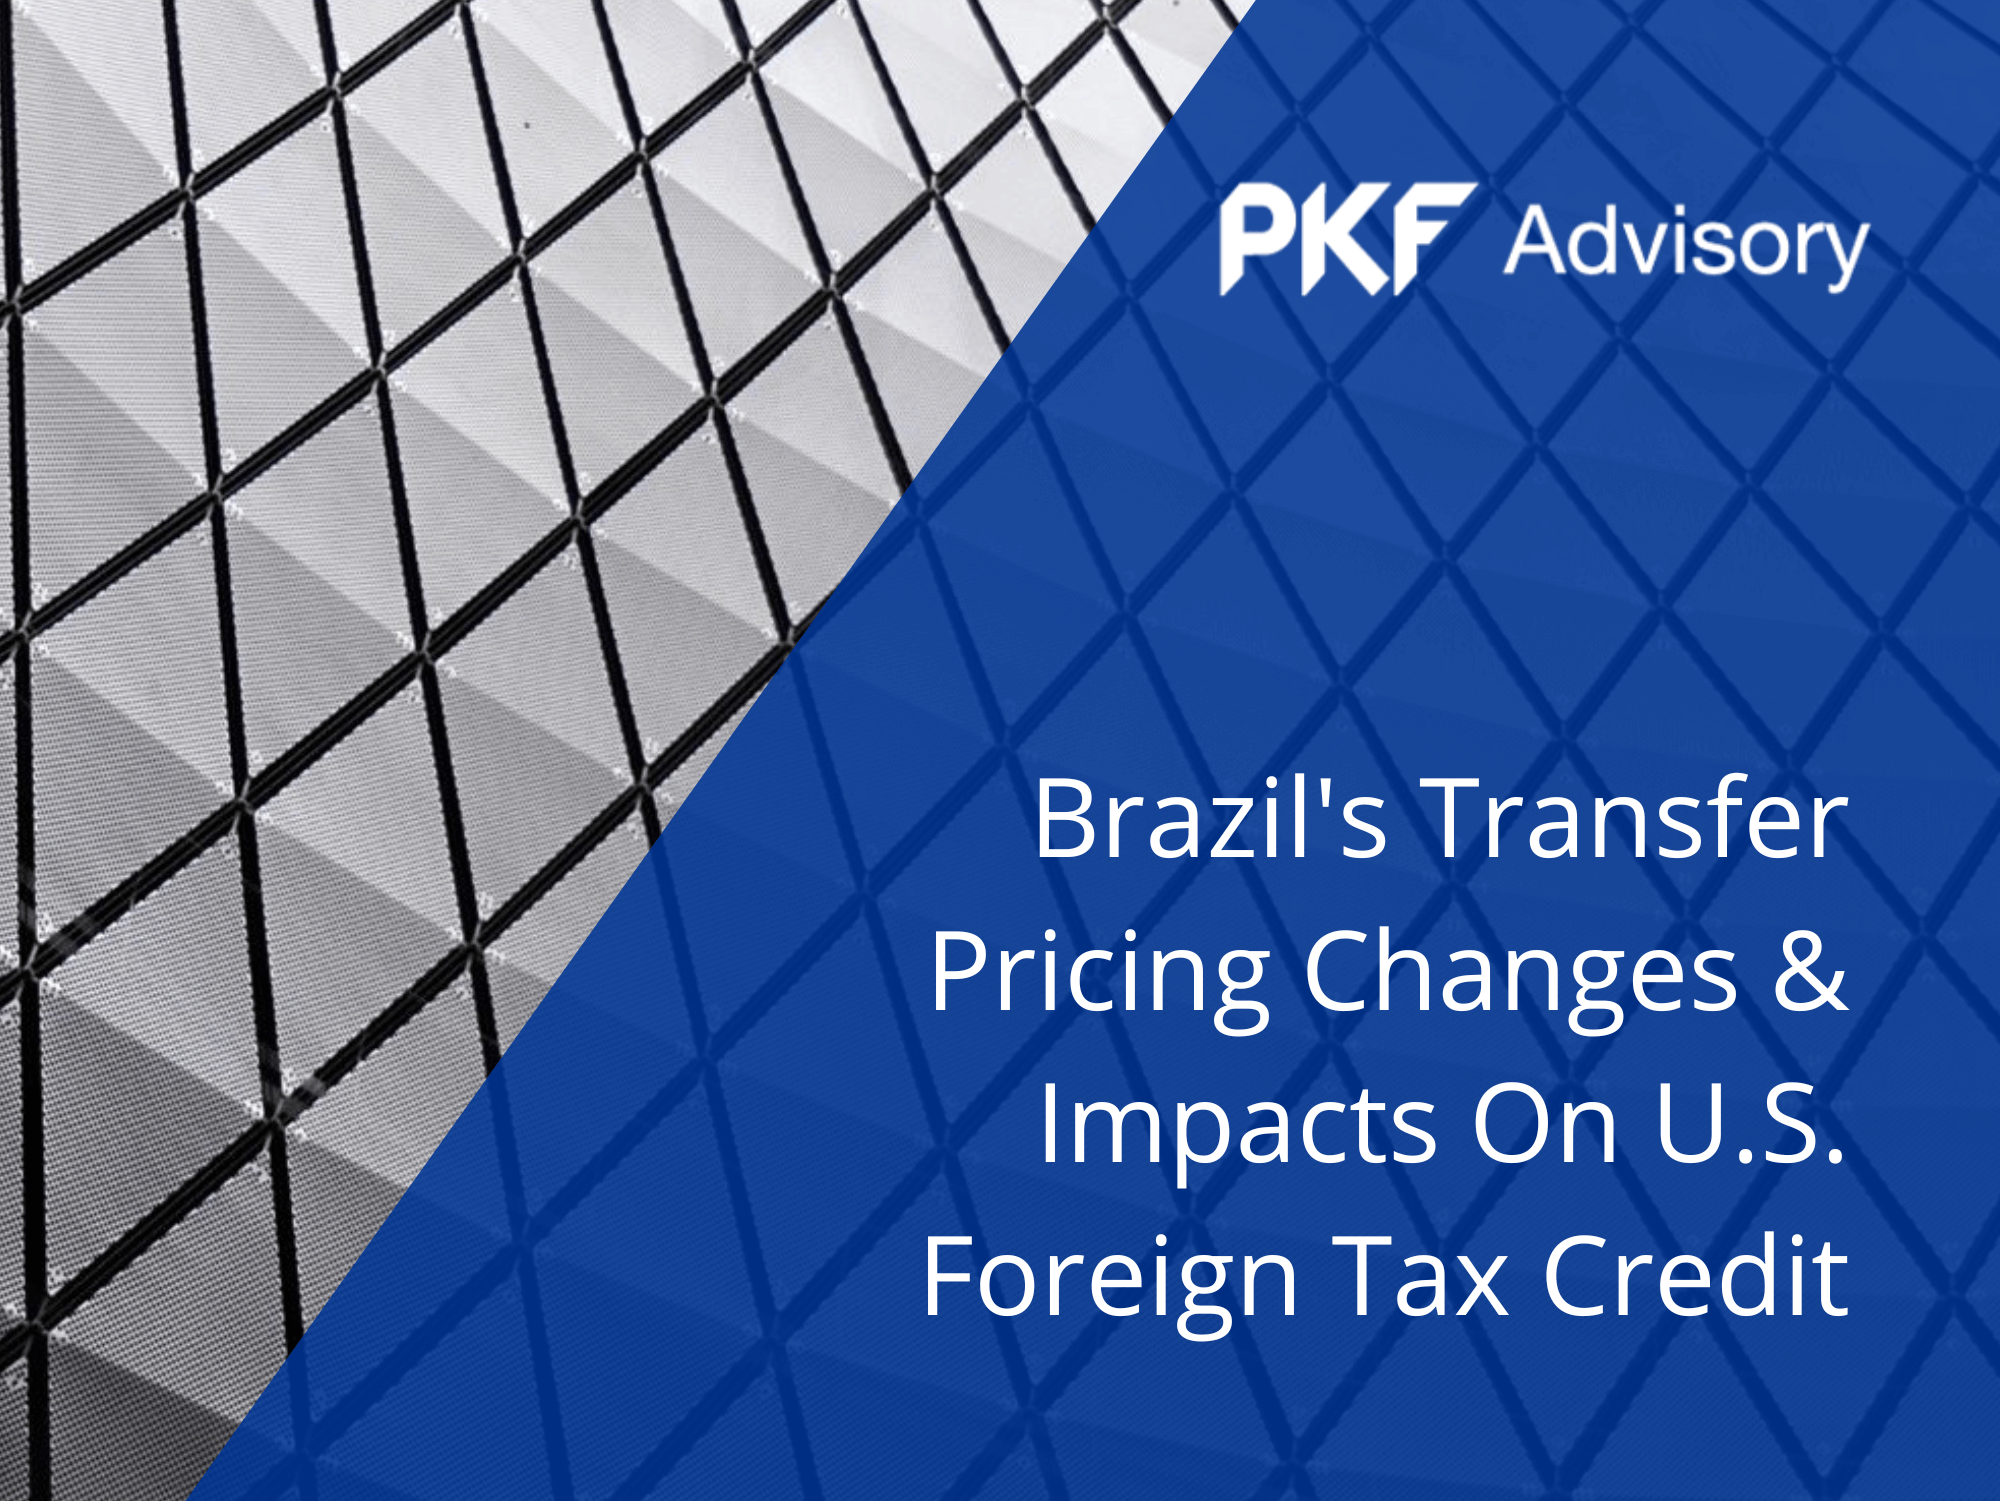 Brazil's Transfer Pricing Changes and Impact on U.S. Foreign Tax Credit